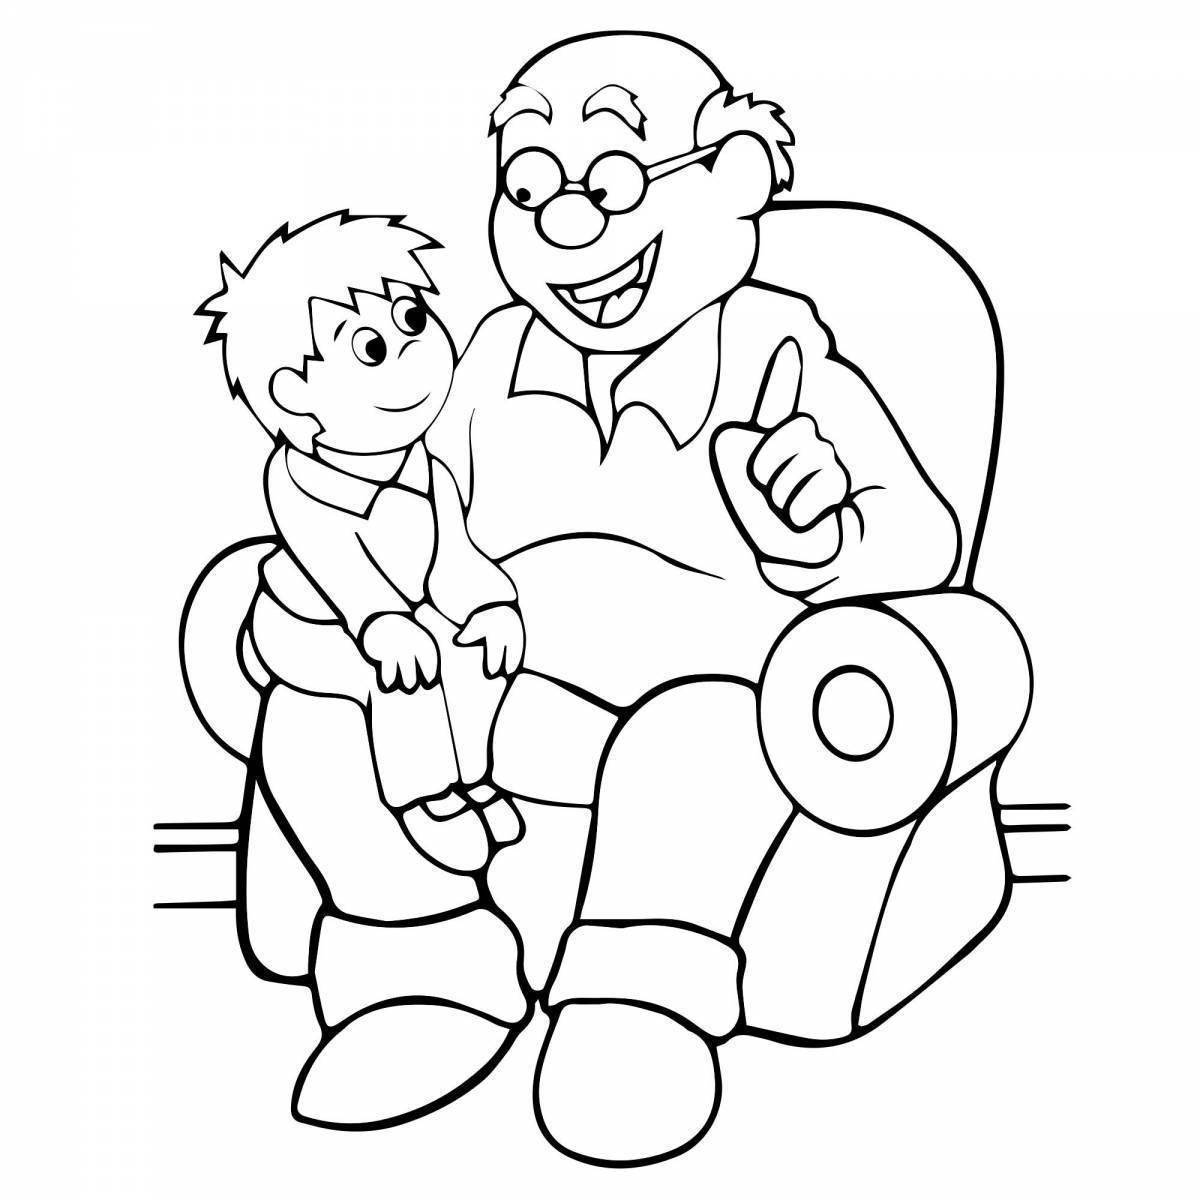 Coloring book smiling grandfather